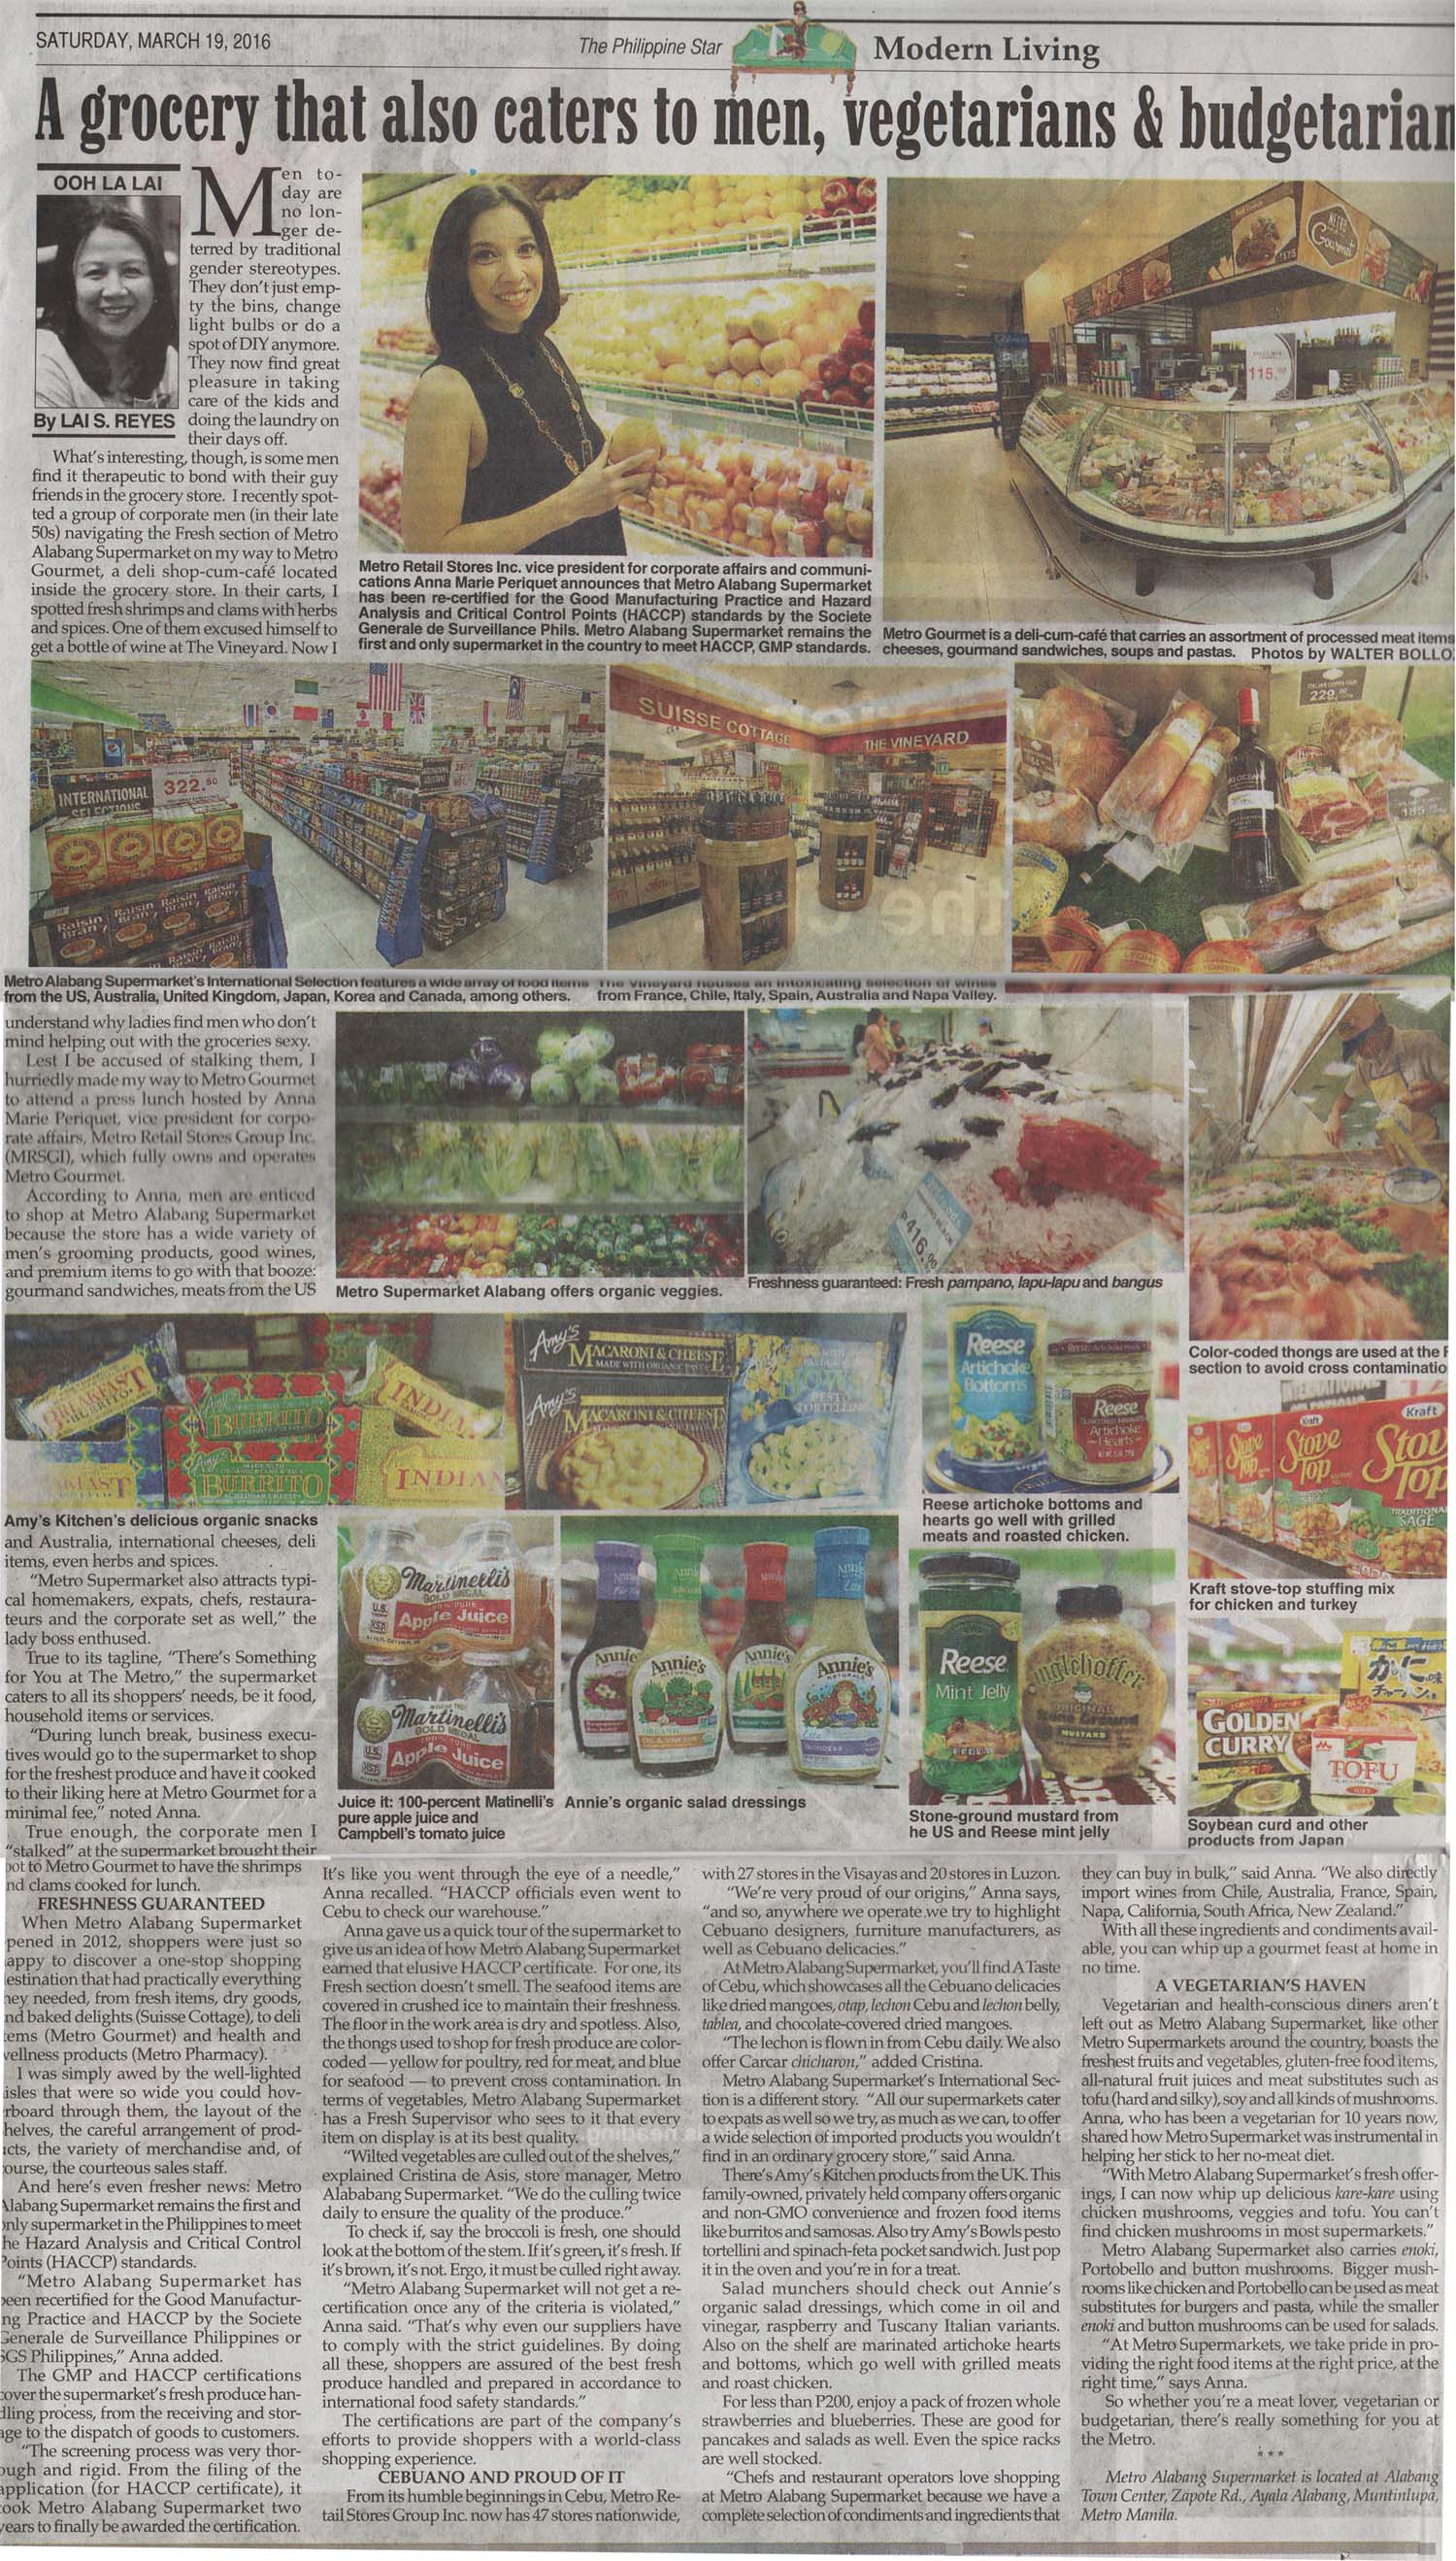 A grocery that also caters to men vegetarians budgetarians The Philippine Star